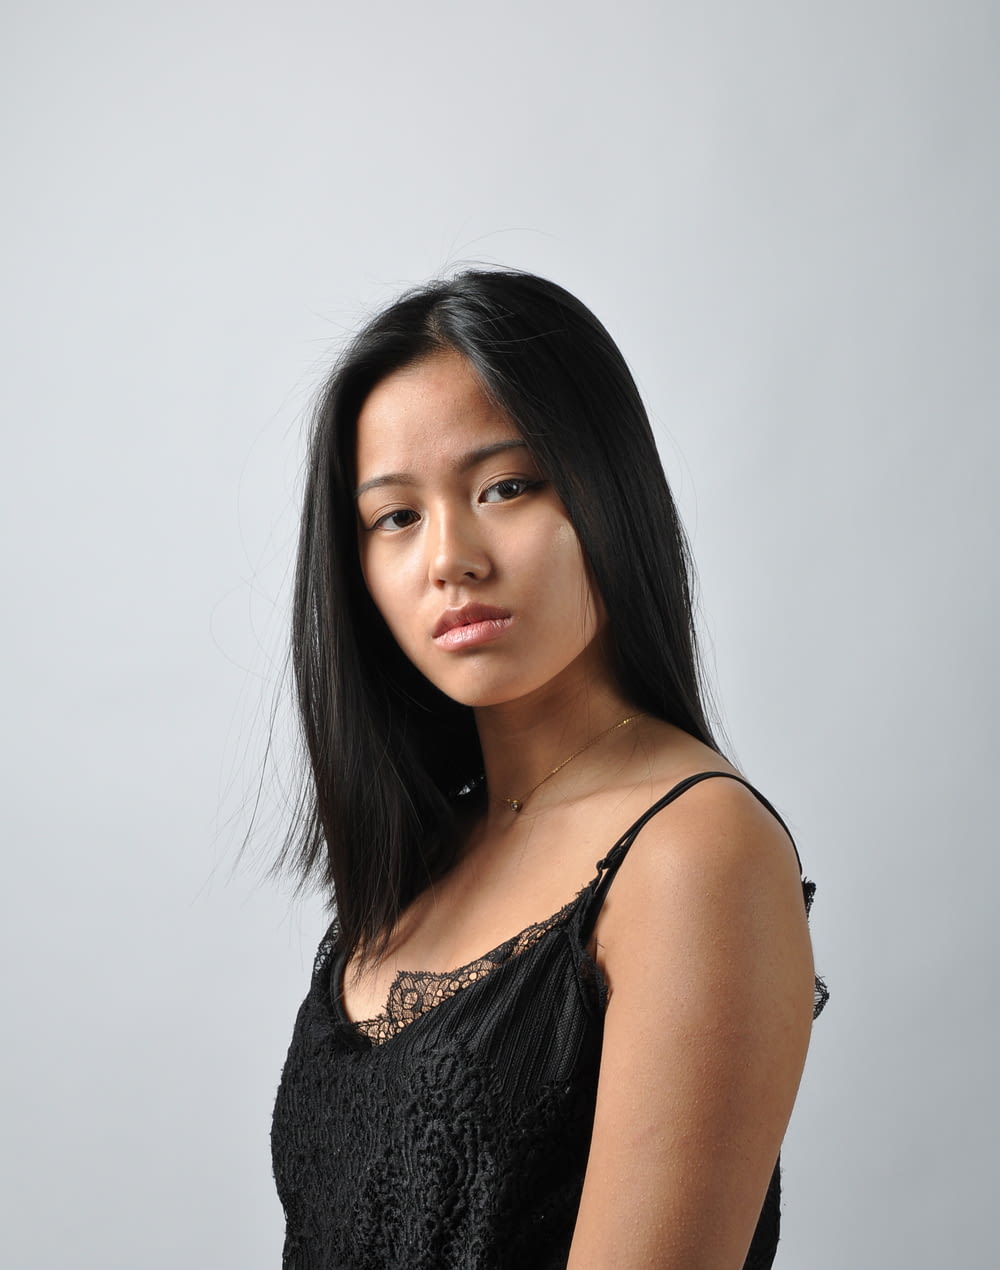 an asian woman in a black dress posing for a picture